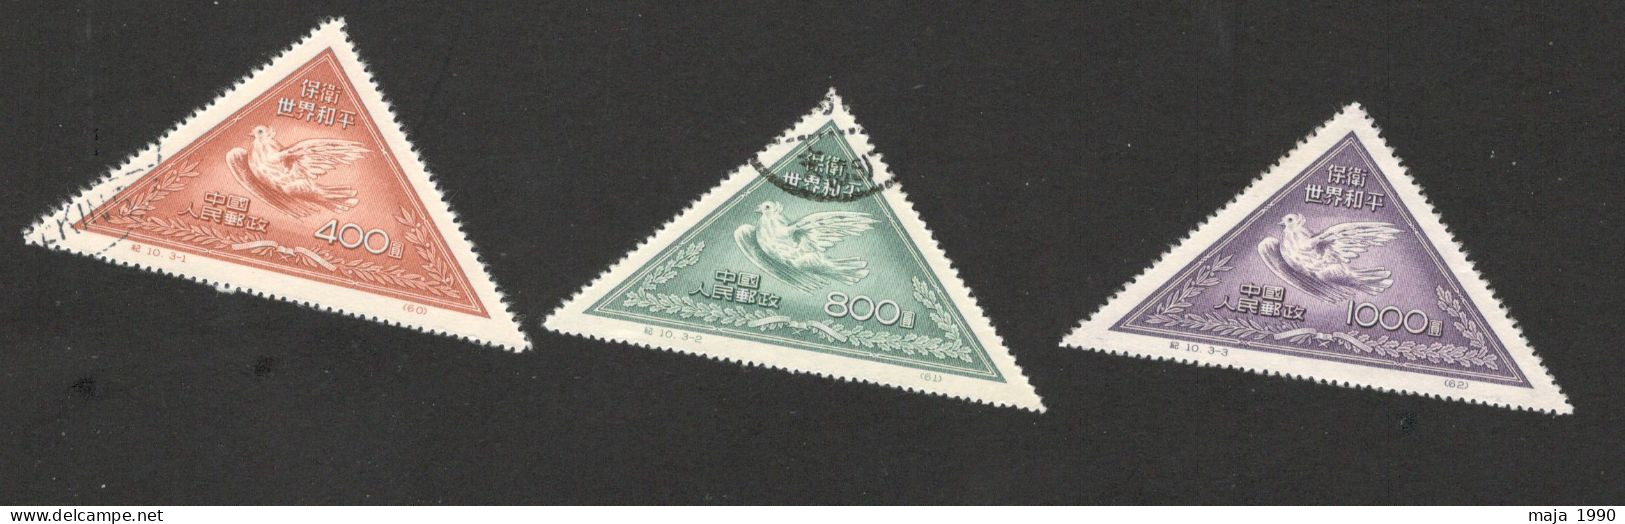 CHINA - USED/MNG SET- PEACE CAMPAIGN - 1951. - Used Stamps